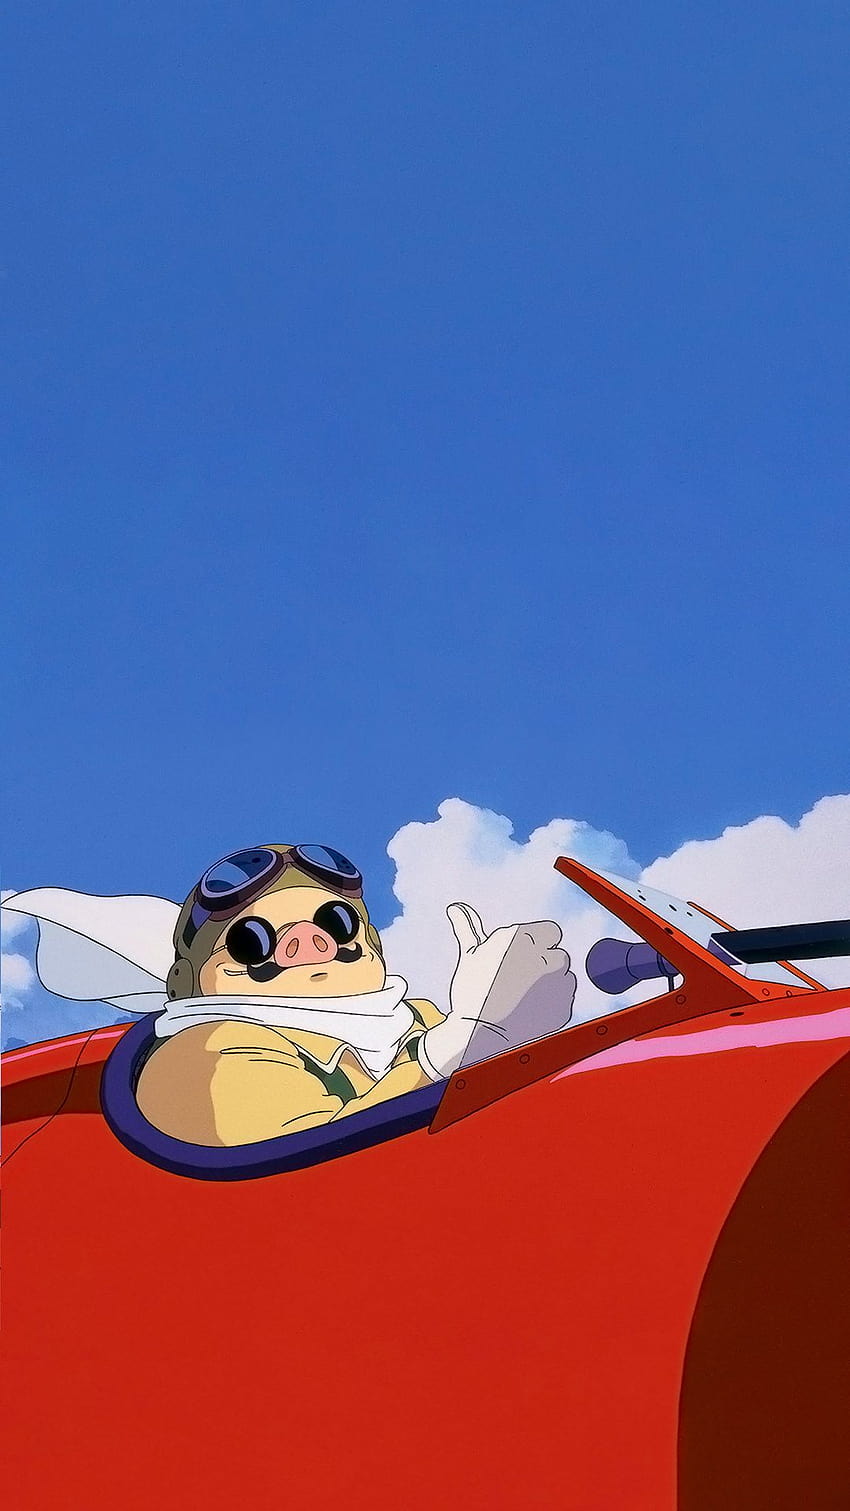 Couldn't find any Porco Rosso , had to make my own HD phone wallpaper